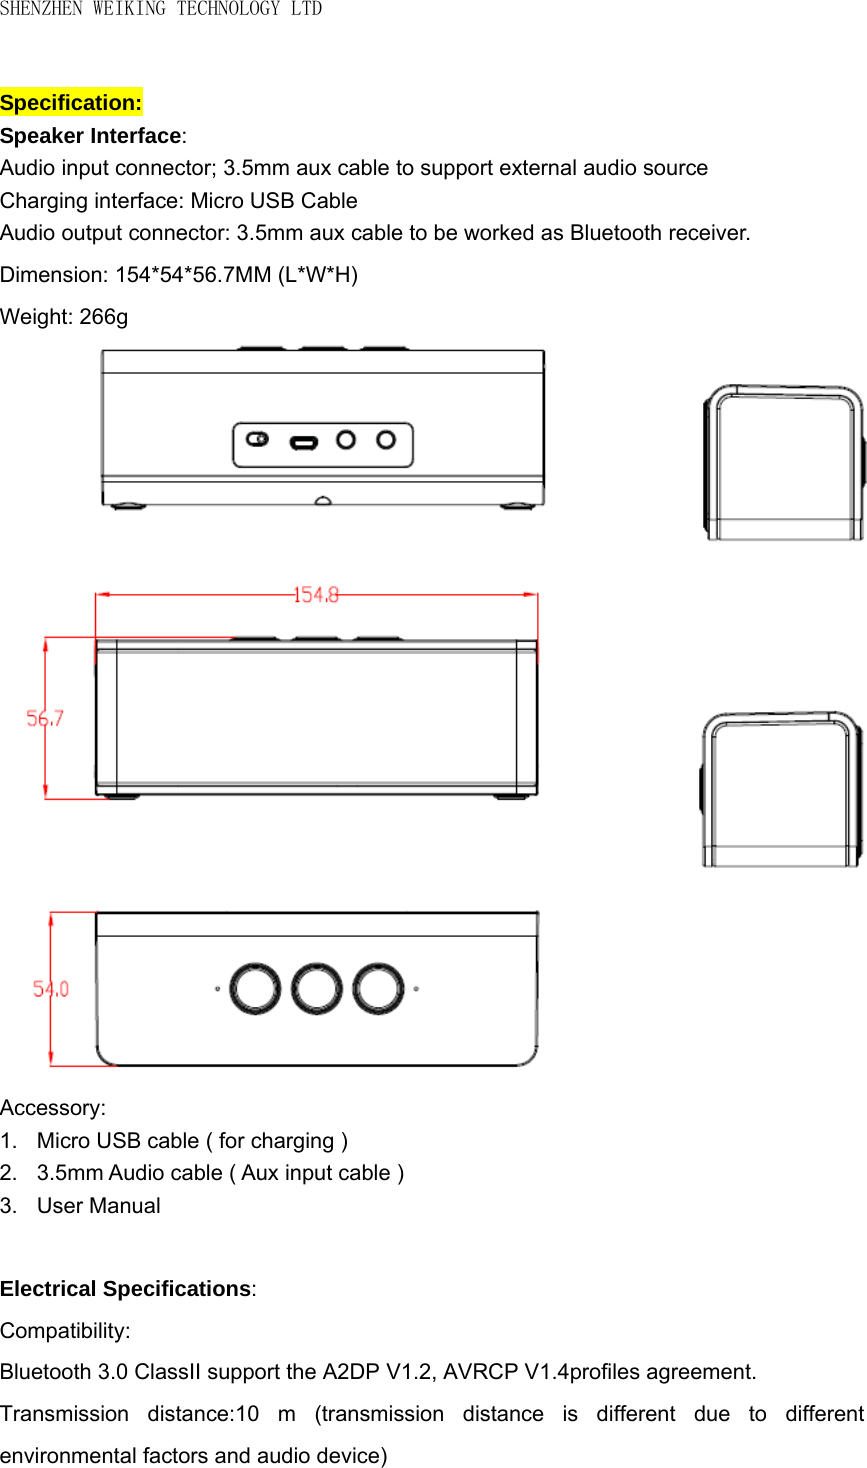 SHENZHEN WEIKING TECHNOLOGY LTD  Specification: Speaker Interface: Audio input connector; 3.5mm aux cable to support external audio source   Charging interface: Micro USB Cable     Audio output connector: 3.5mm aux cable to be worked as Bluetooth receiver. Dimension: 154*54*56.7MM (L*W*H) Weight: 266g                   Accessory: 1.  Micro USB cable ( for charging )   2. 3.5mm Audio cable ( Aux input cable ) 3. User Manual  Electrical Specifications: Compatibility: Bluetooth 3.0 ClassII support the A2DP V1.2, AVRCP V1.4profiles agreement. Transmission distance:10 m (transmission distance is different due to different environmental factors and audio device) 